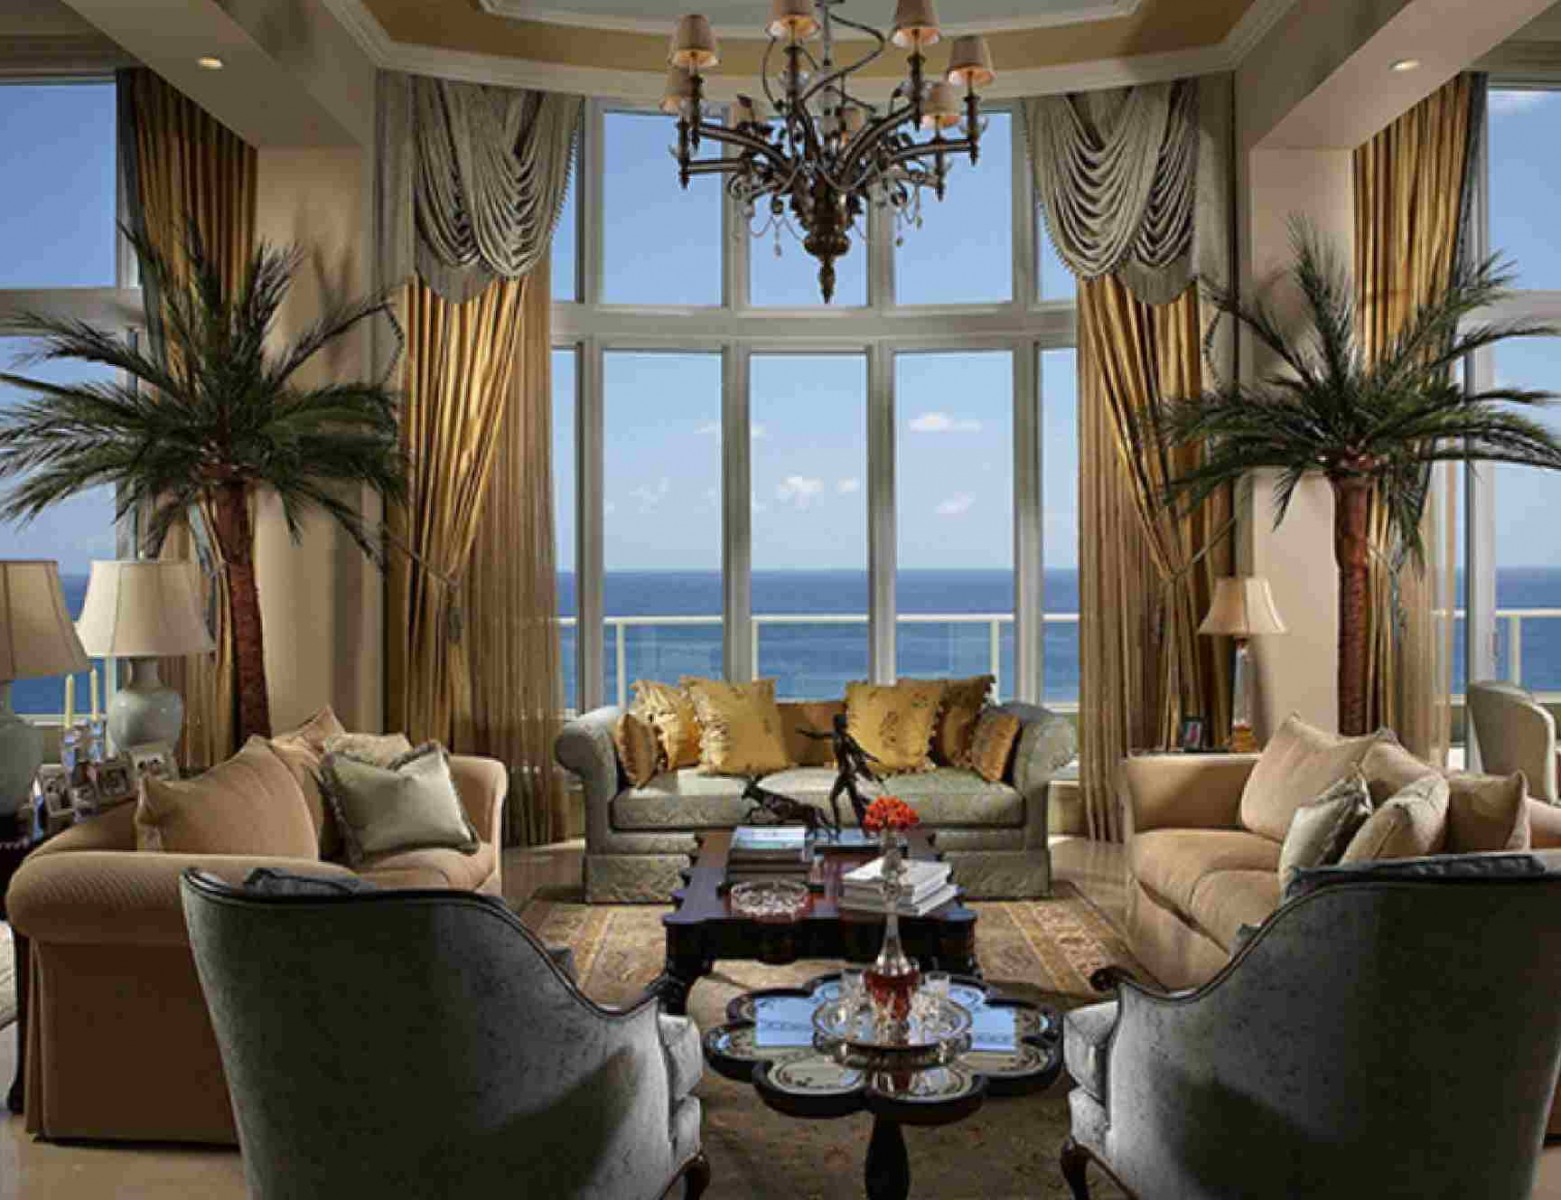 A living room with a view of the ocean and gold accents.